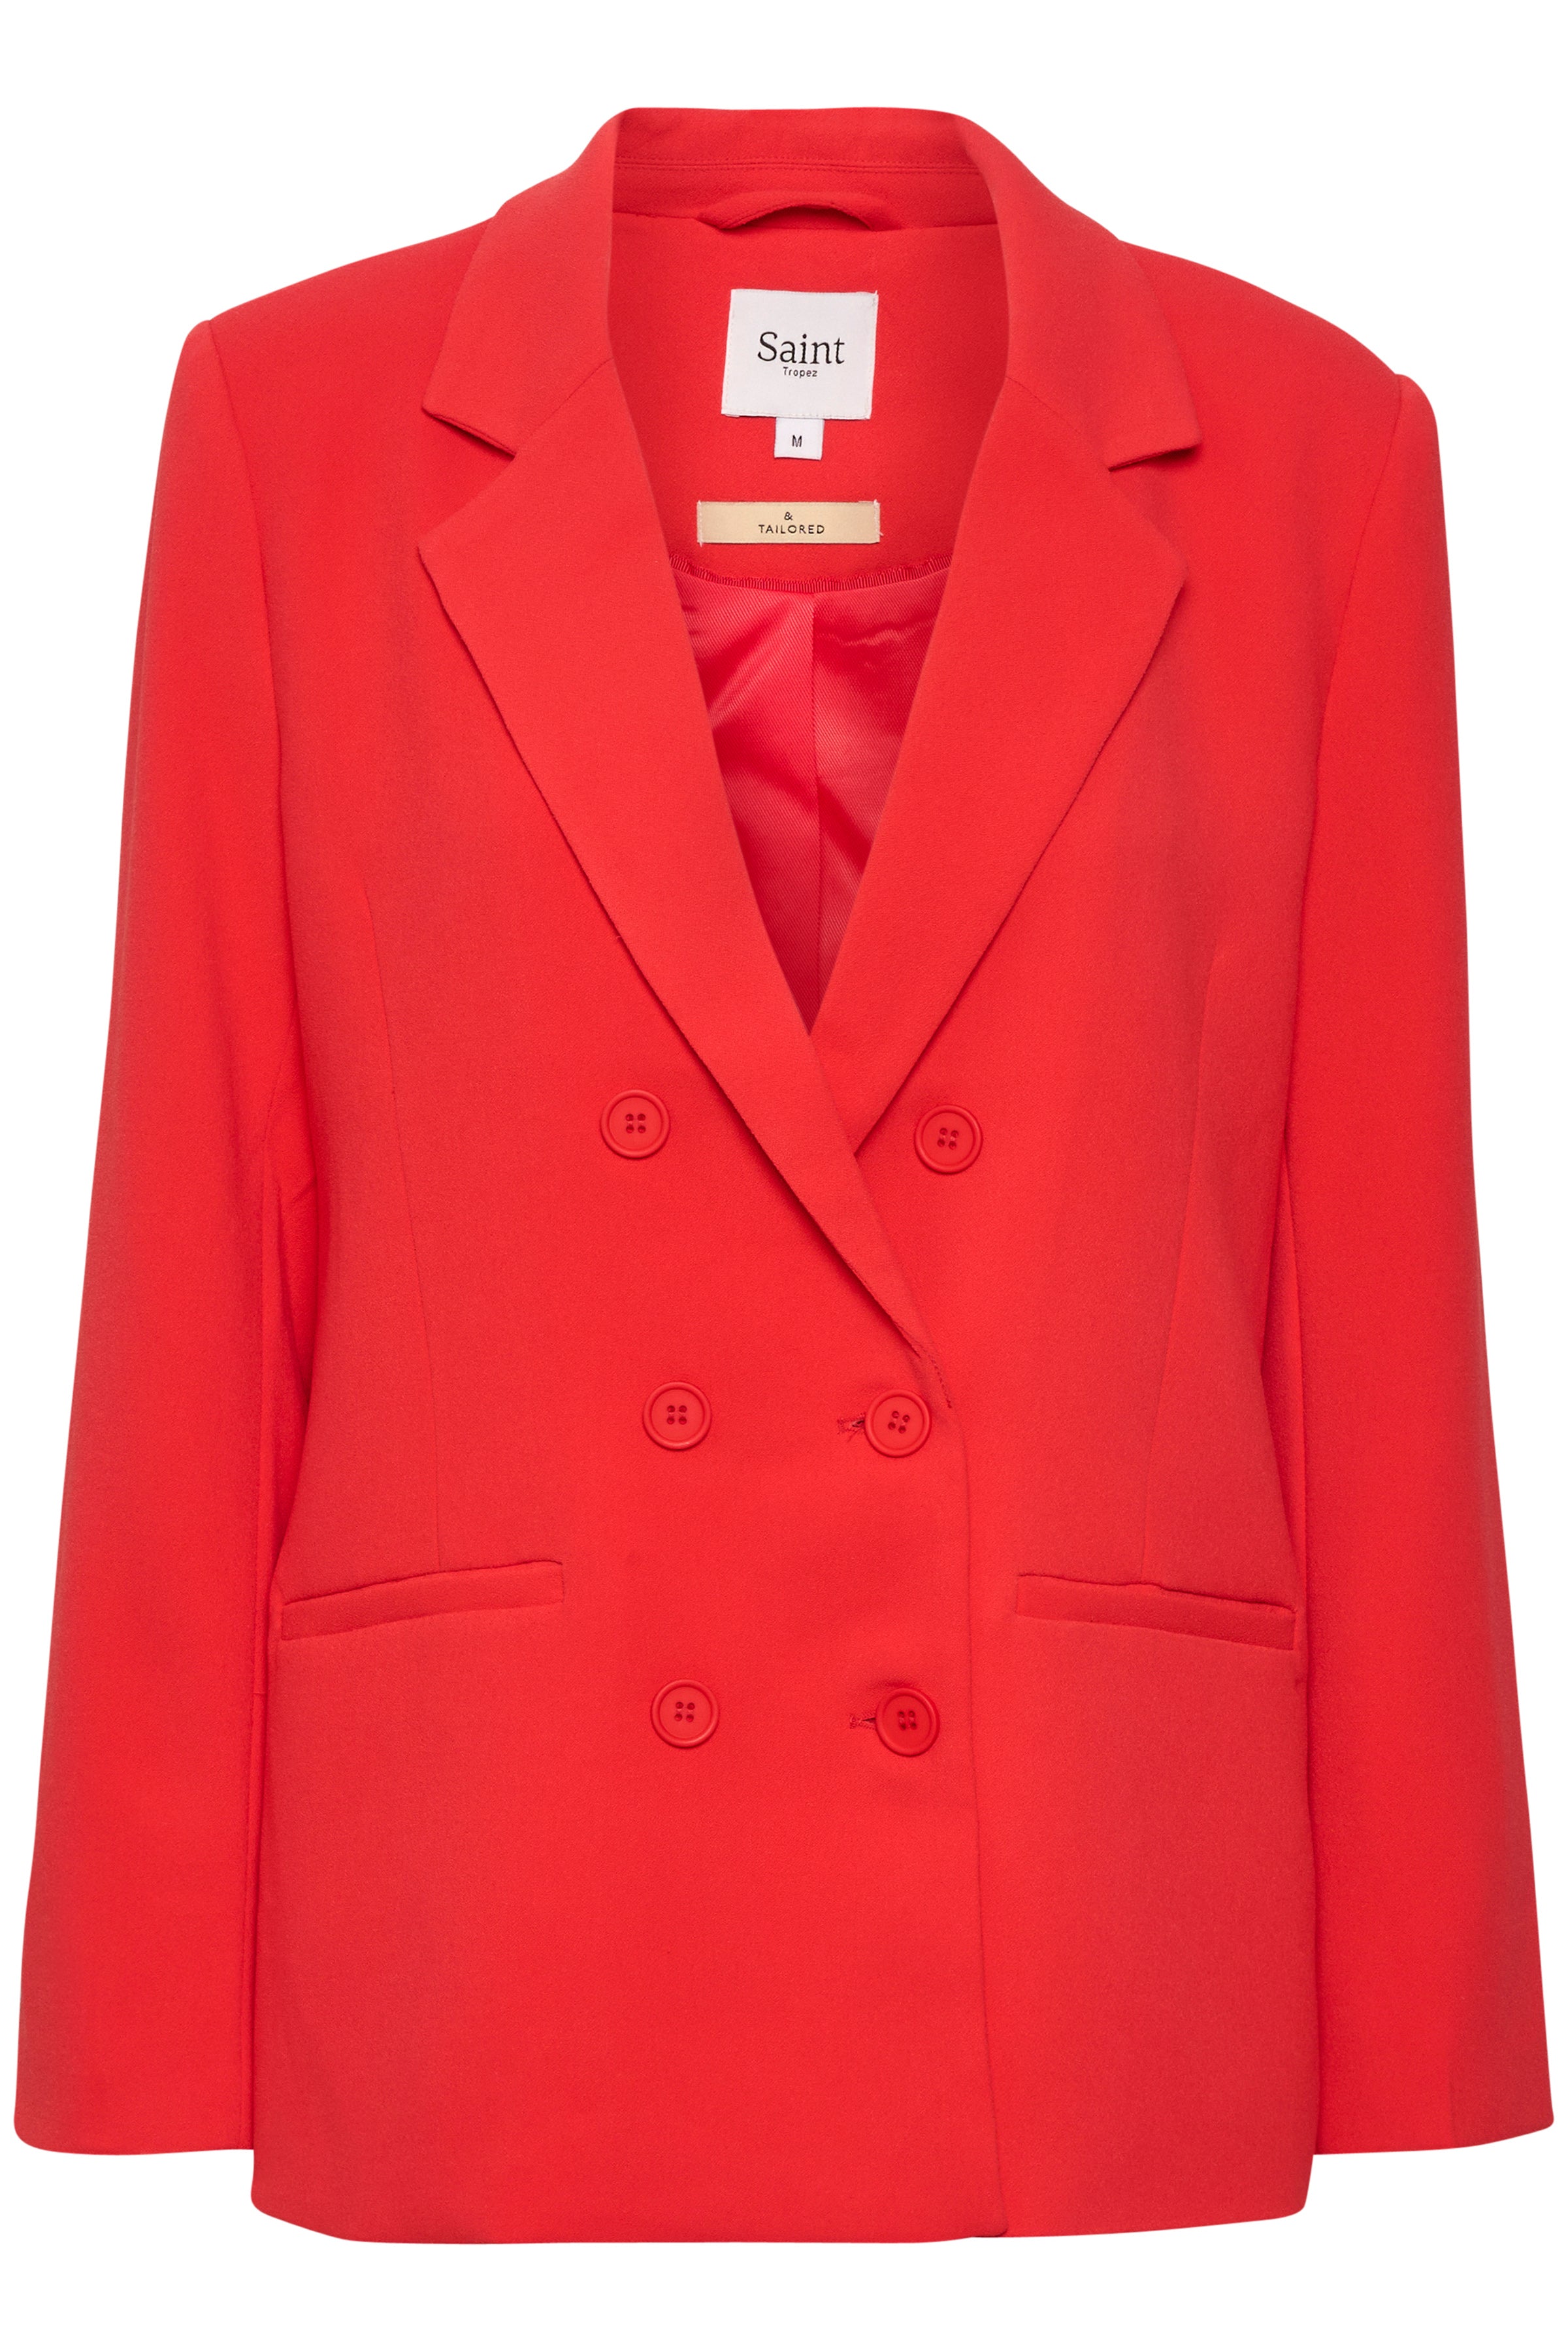 Saint Tropez Torry Double Breasted Blazer - Red